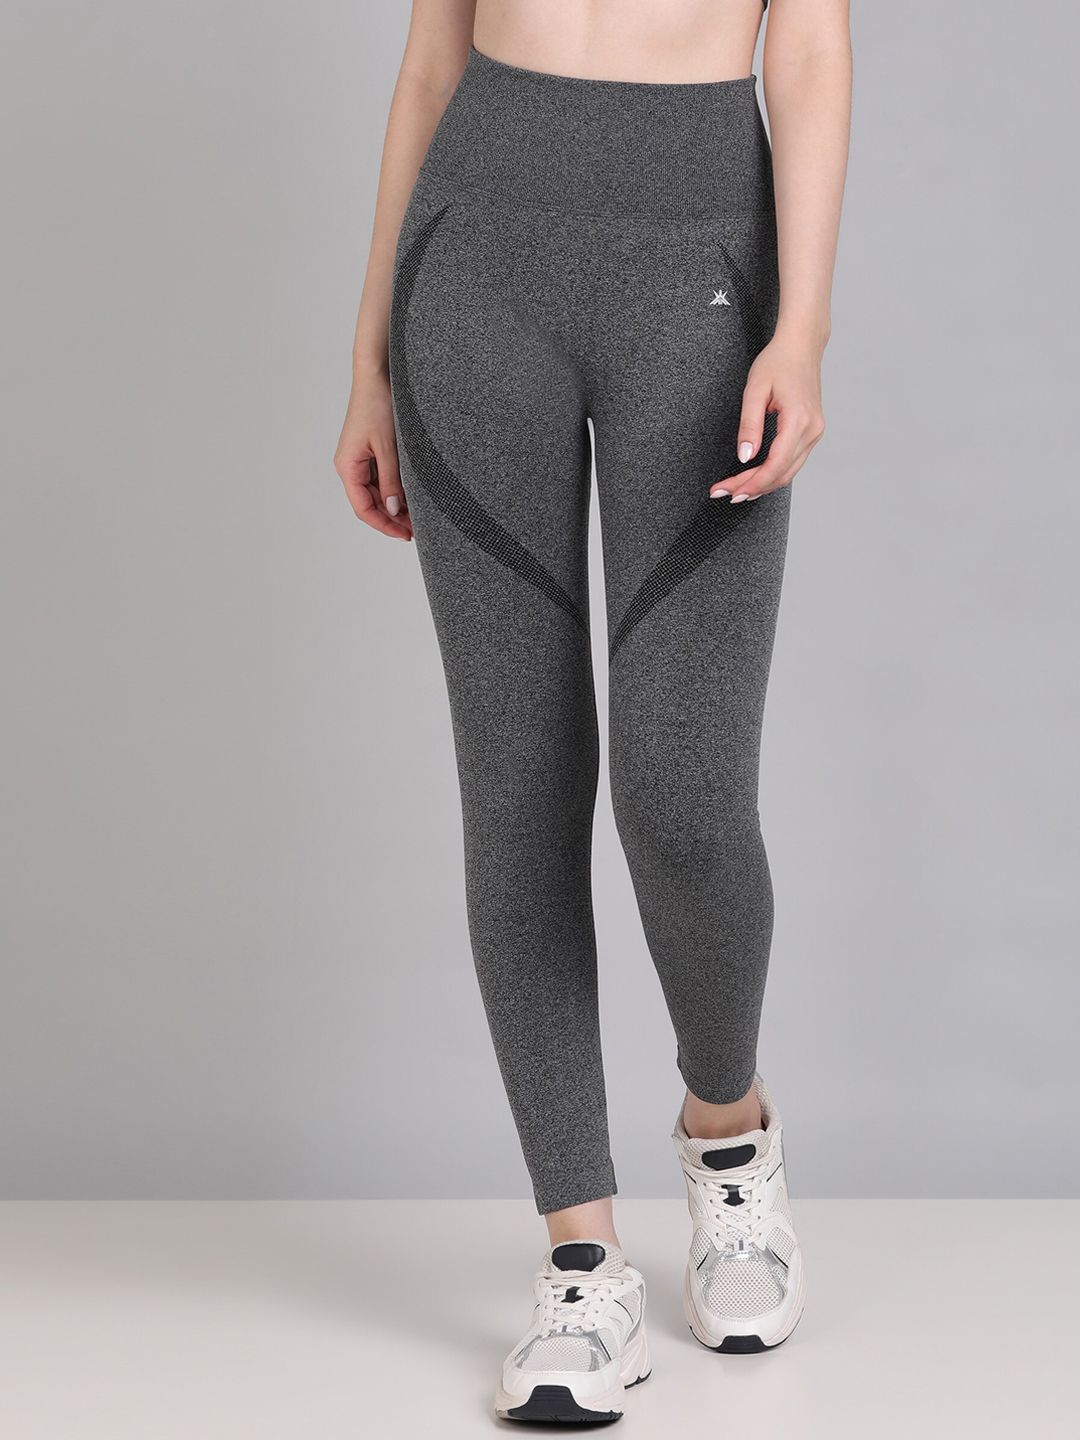 Seamless Squat Proof Leggings - KOBO SPORTS Exclusively Designed